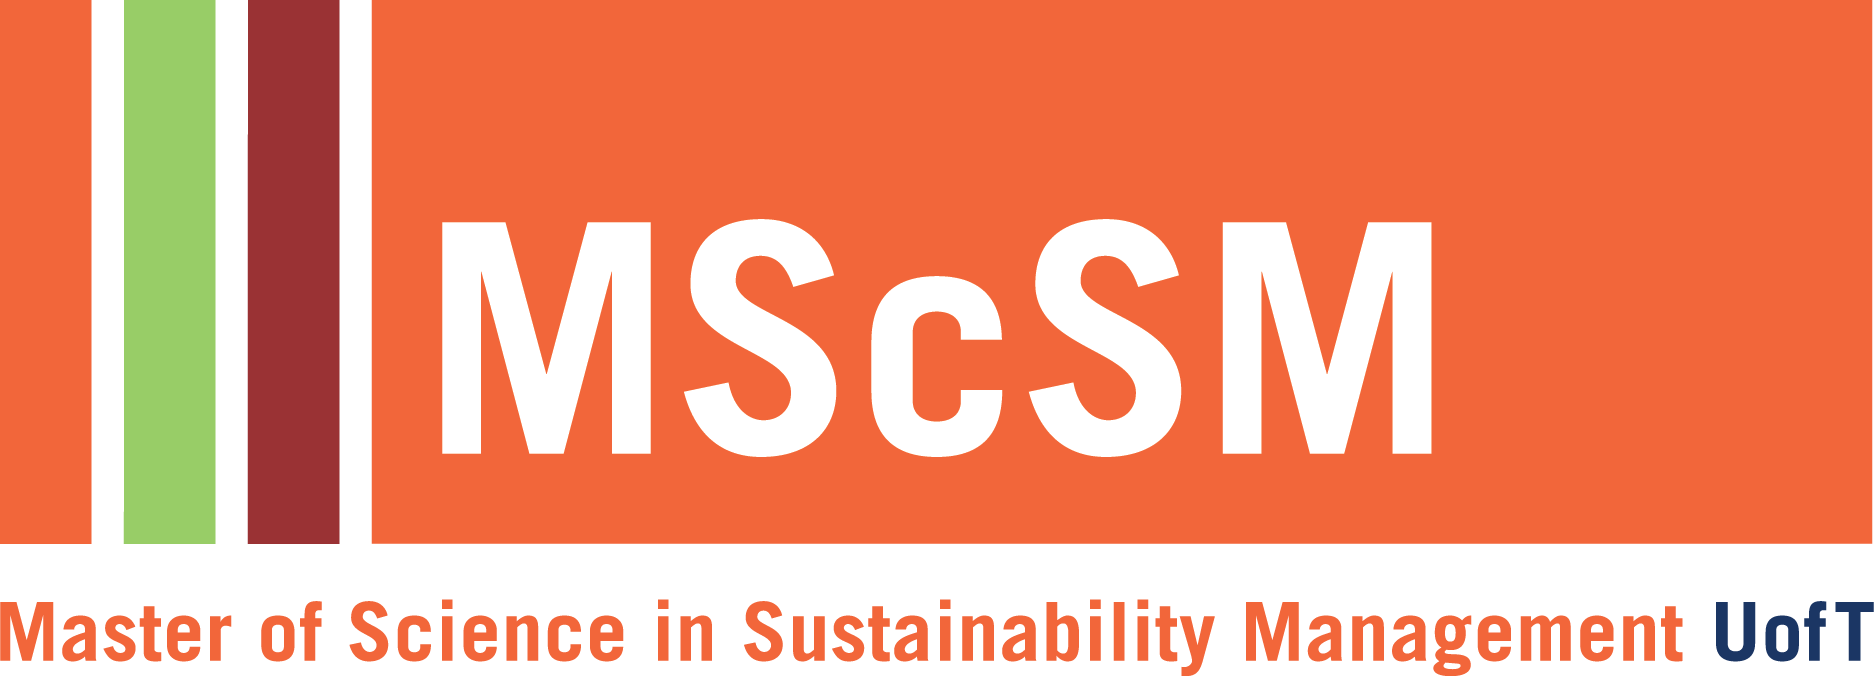 Showcase Image for Master of Science in Sustainability Management (MScSM)